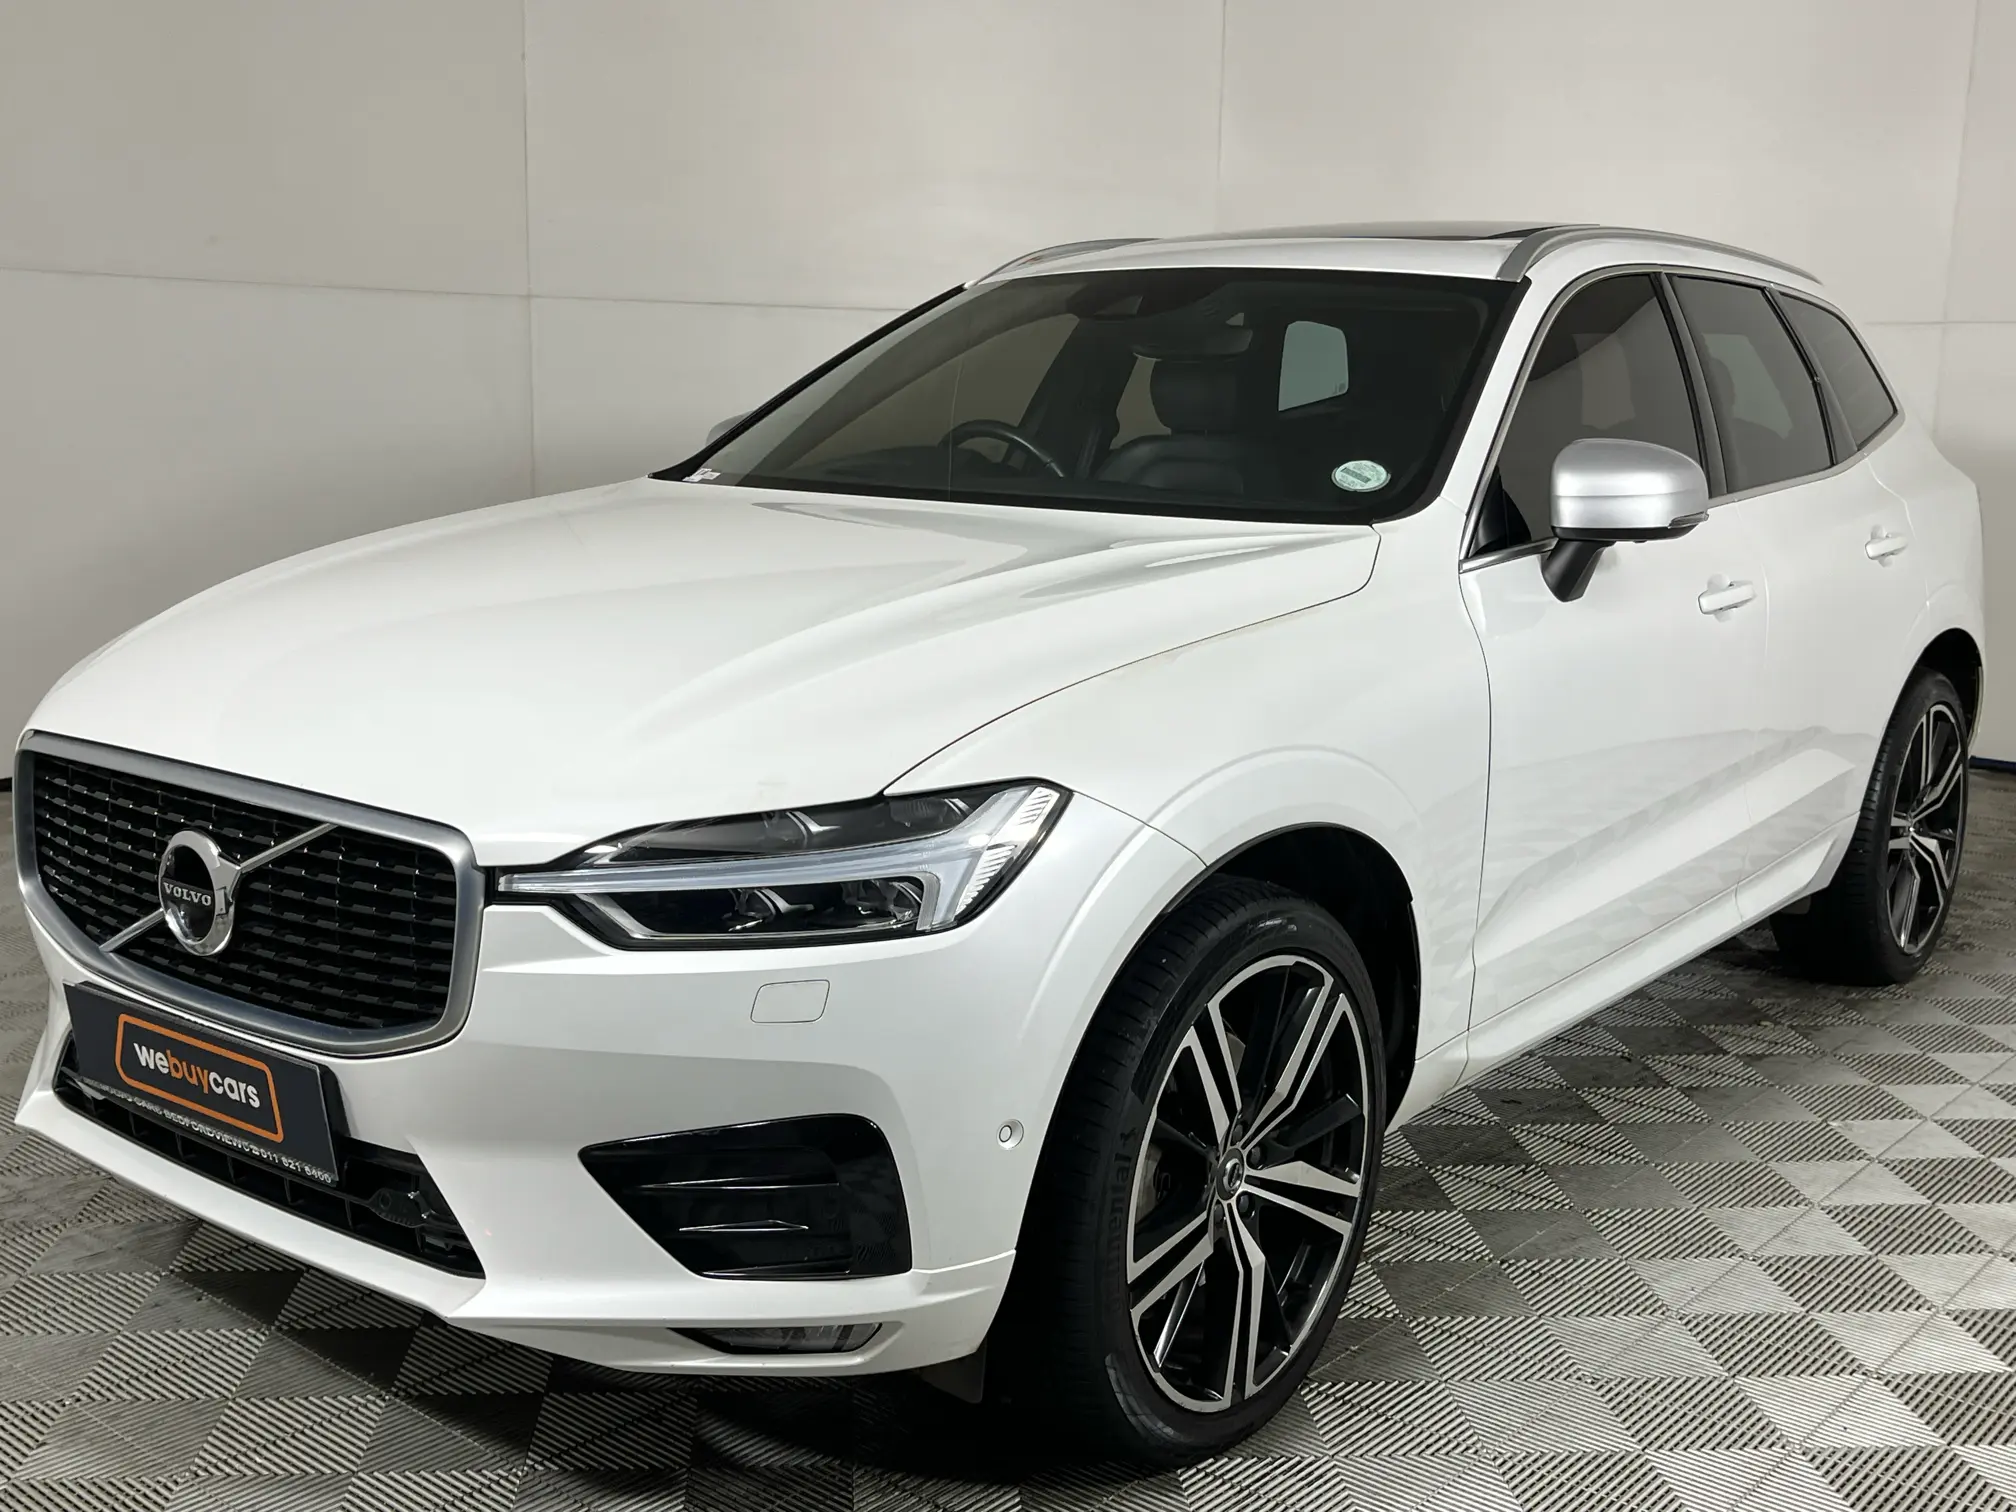 2019 Volvo Xc60 D5 R-Design Geartronic AWD